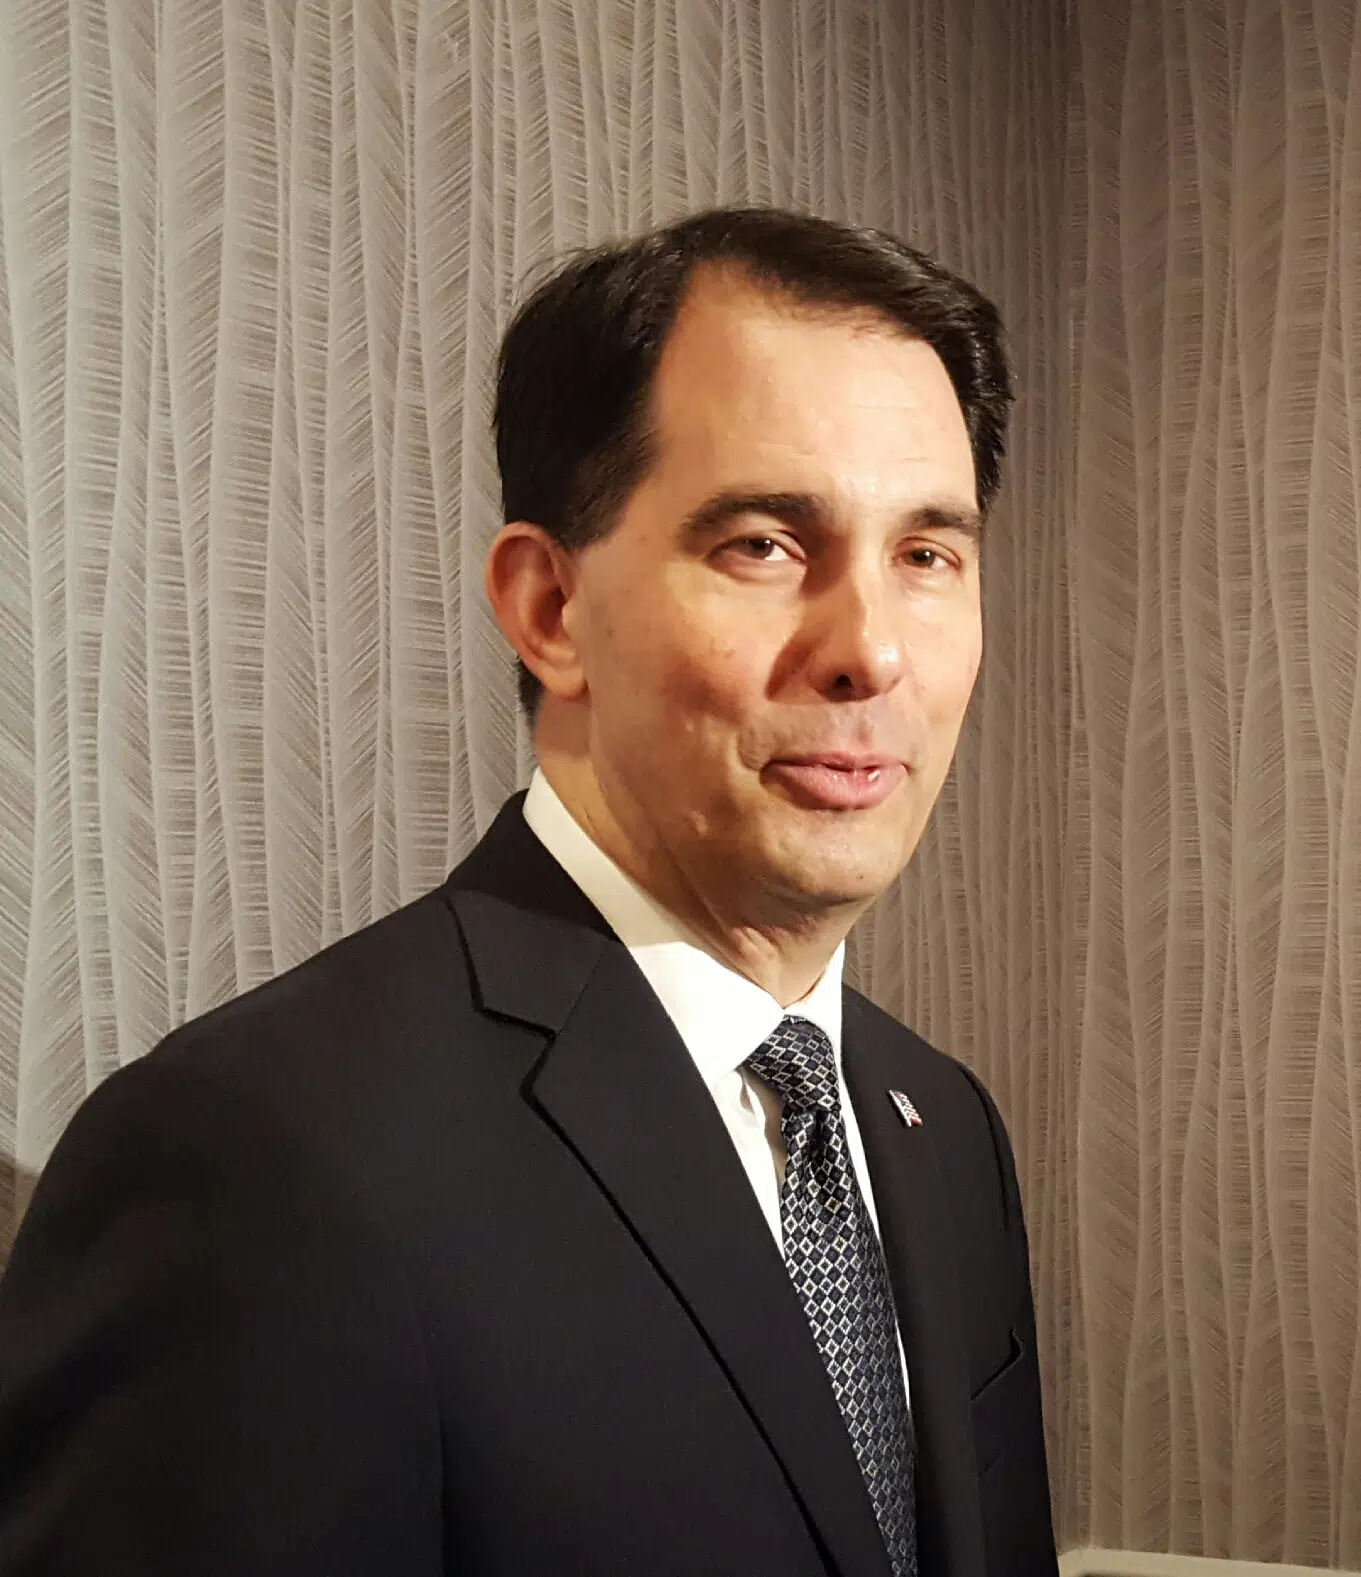 Governor Walker made Appearance in Shawano 